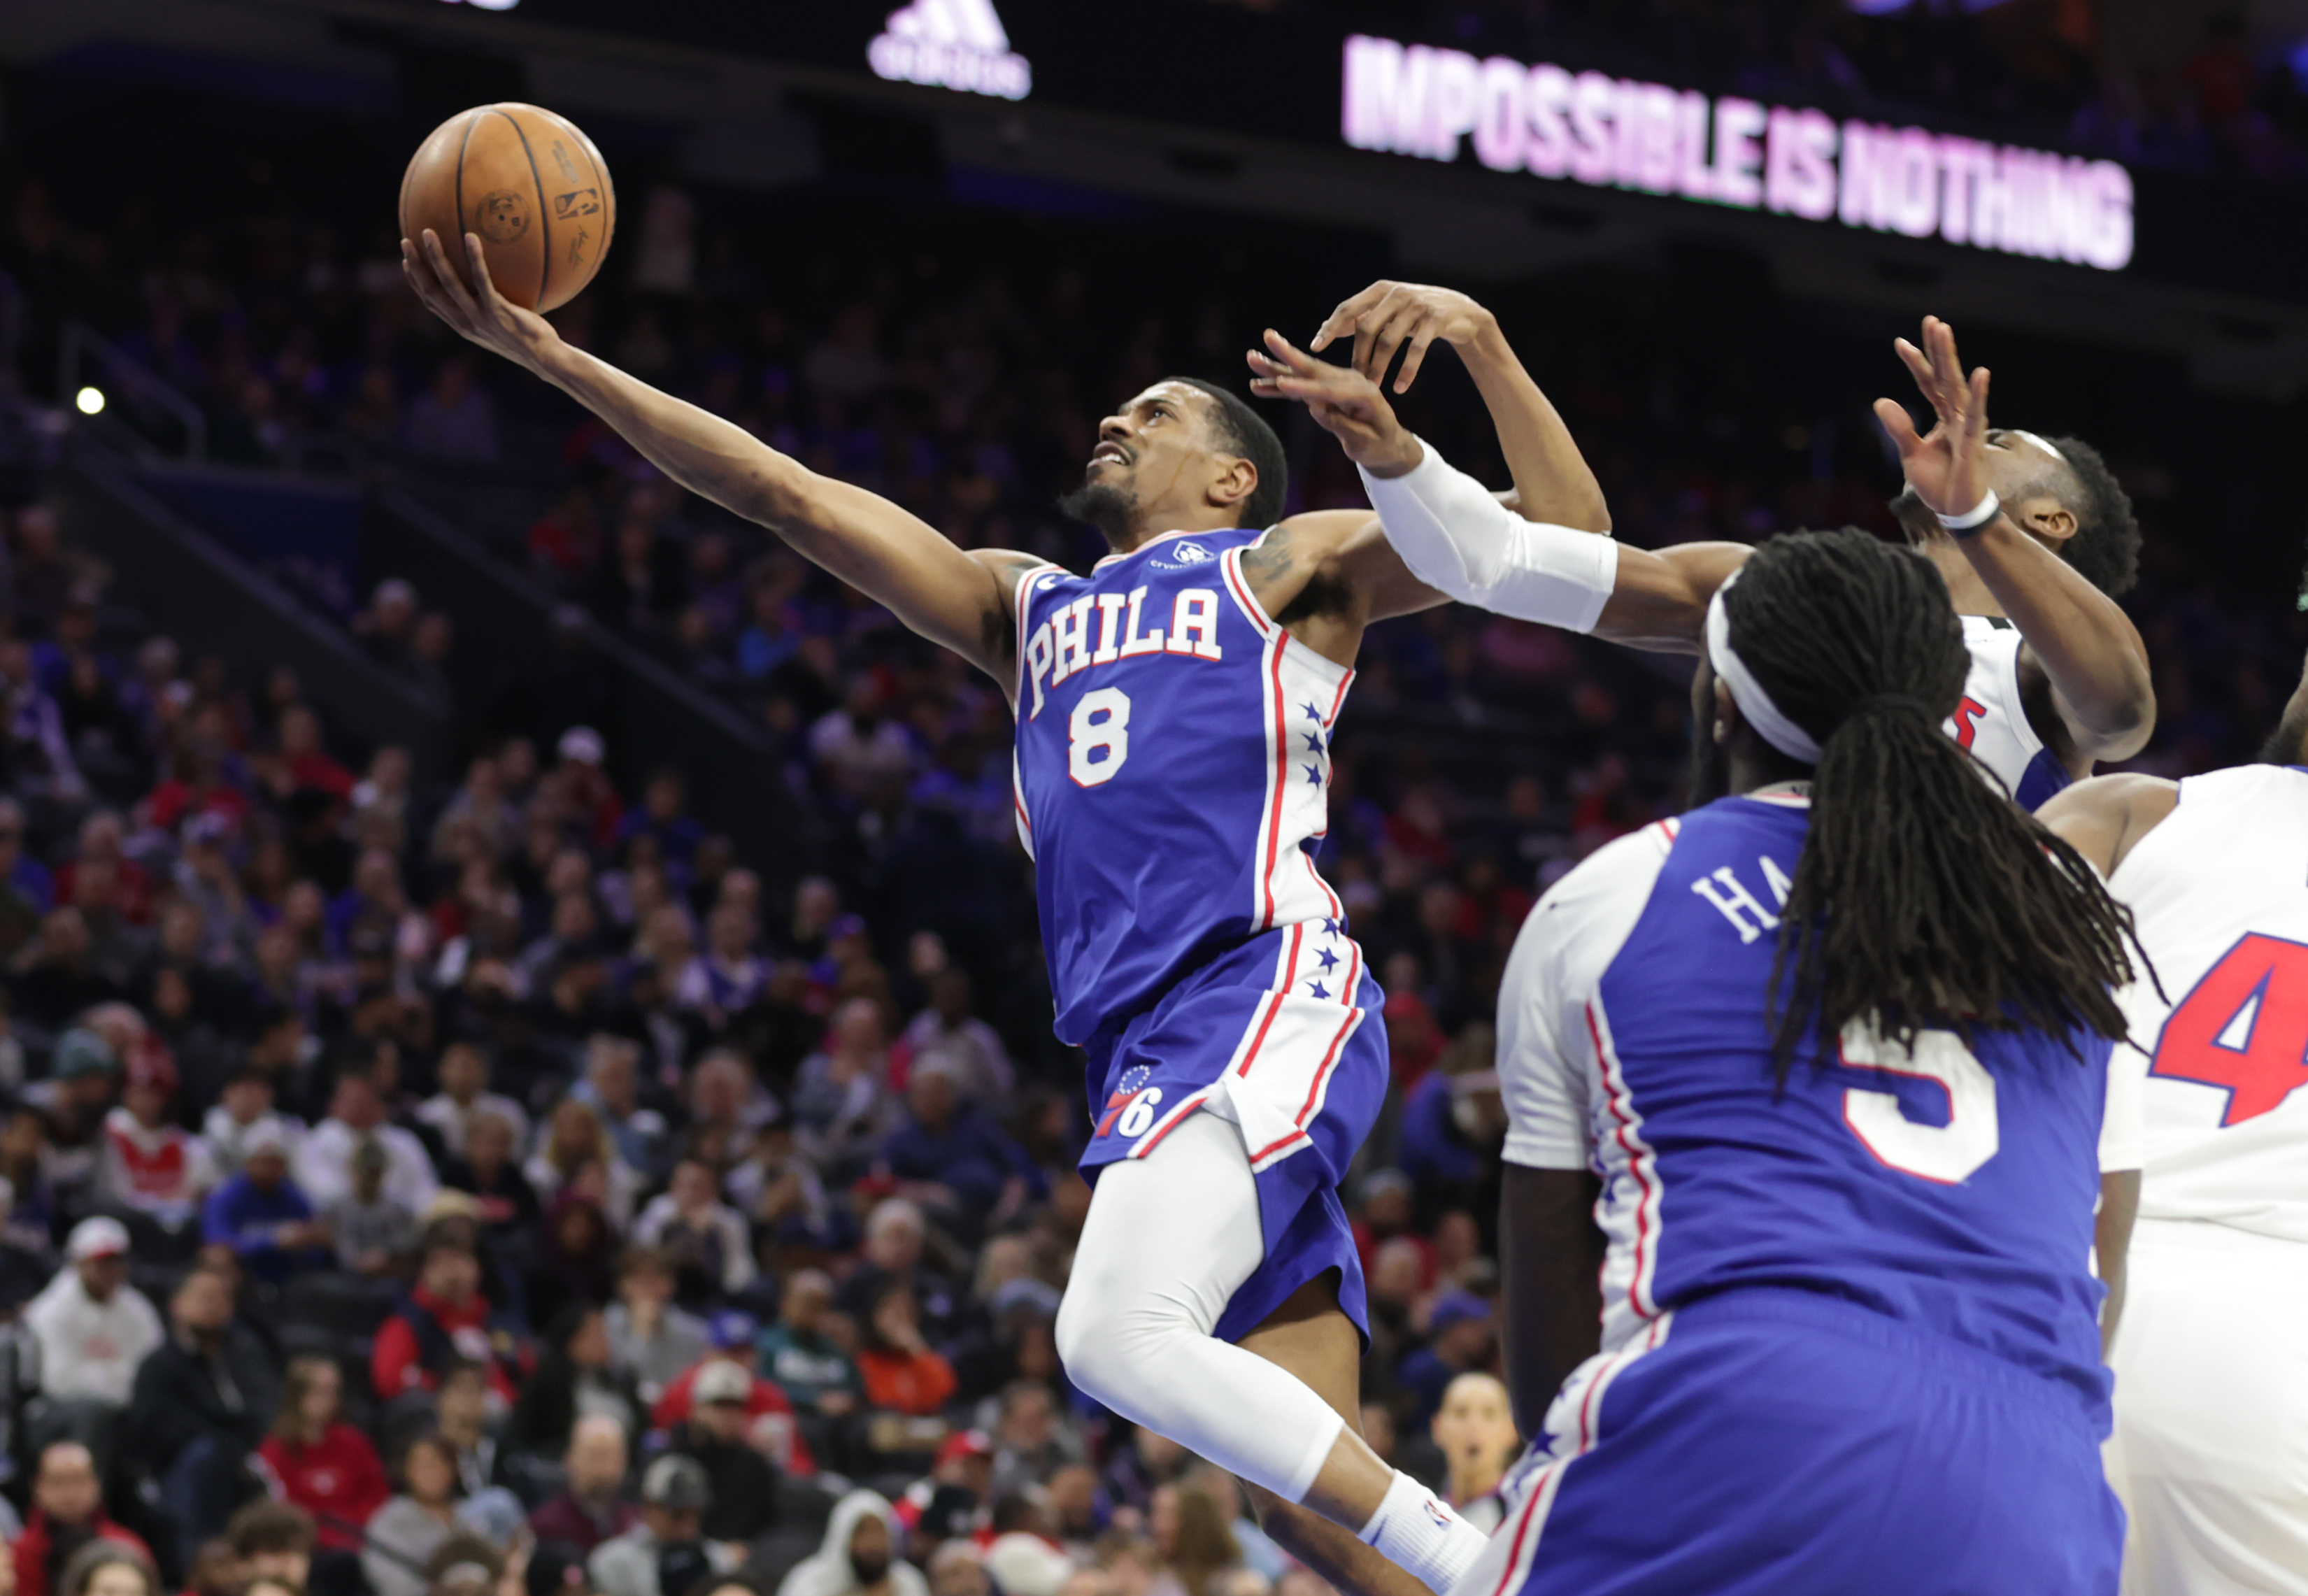 De'Anthony Melton content with reserve role as Sixers return to